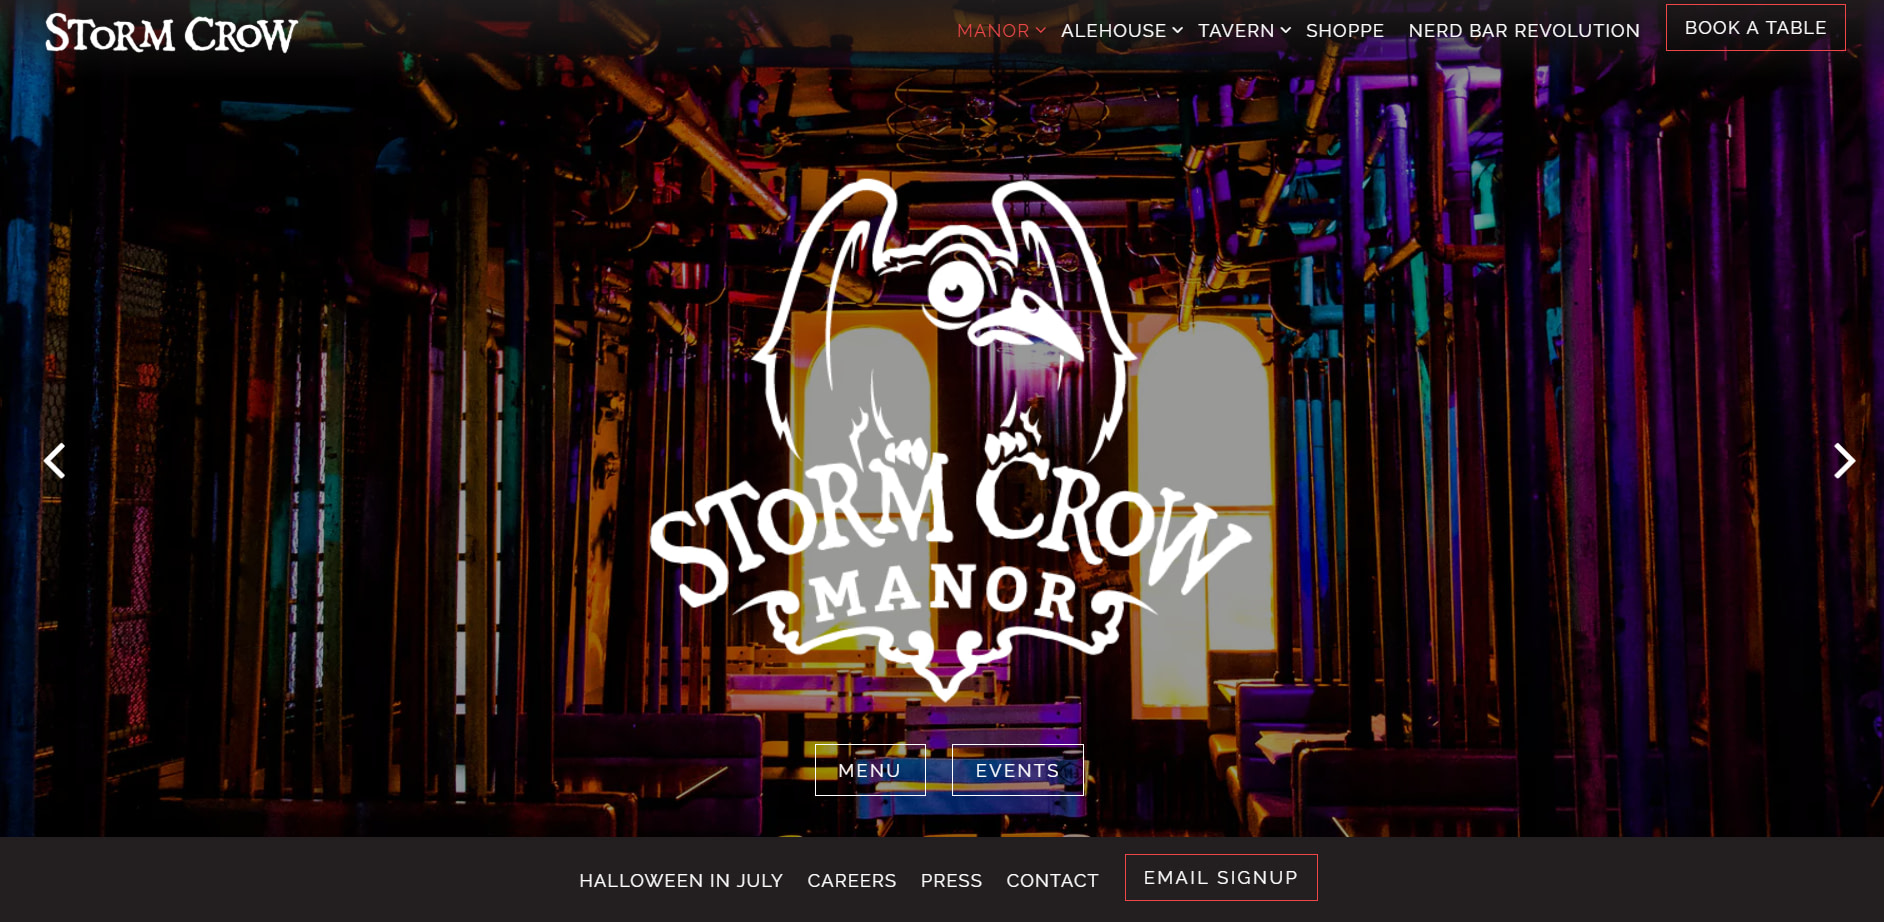 The Stormcrown Manner need a website to give a feel for its decor